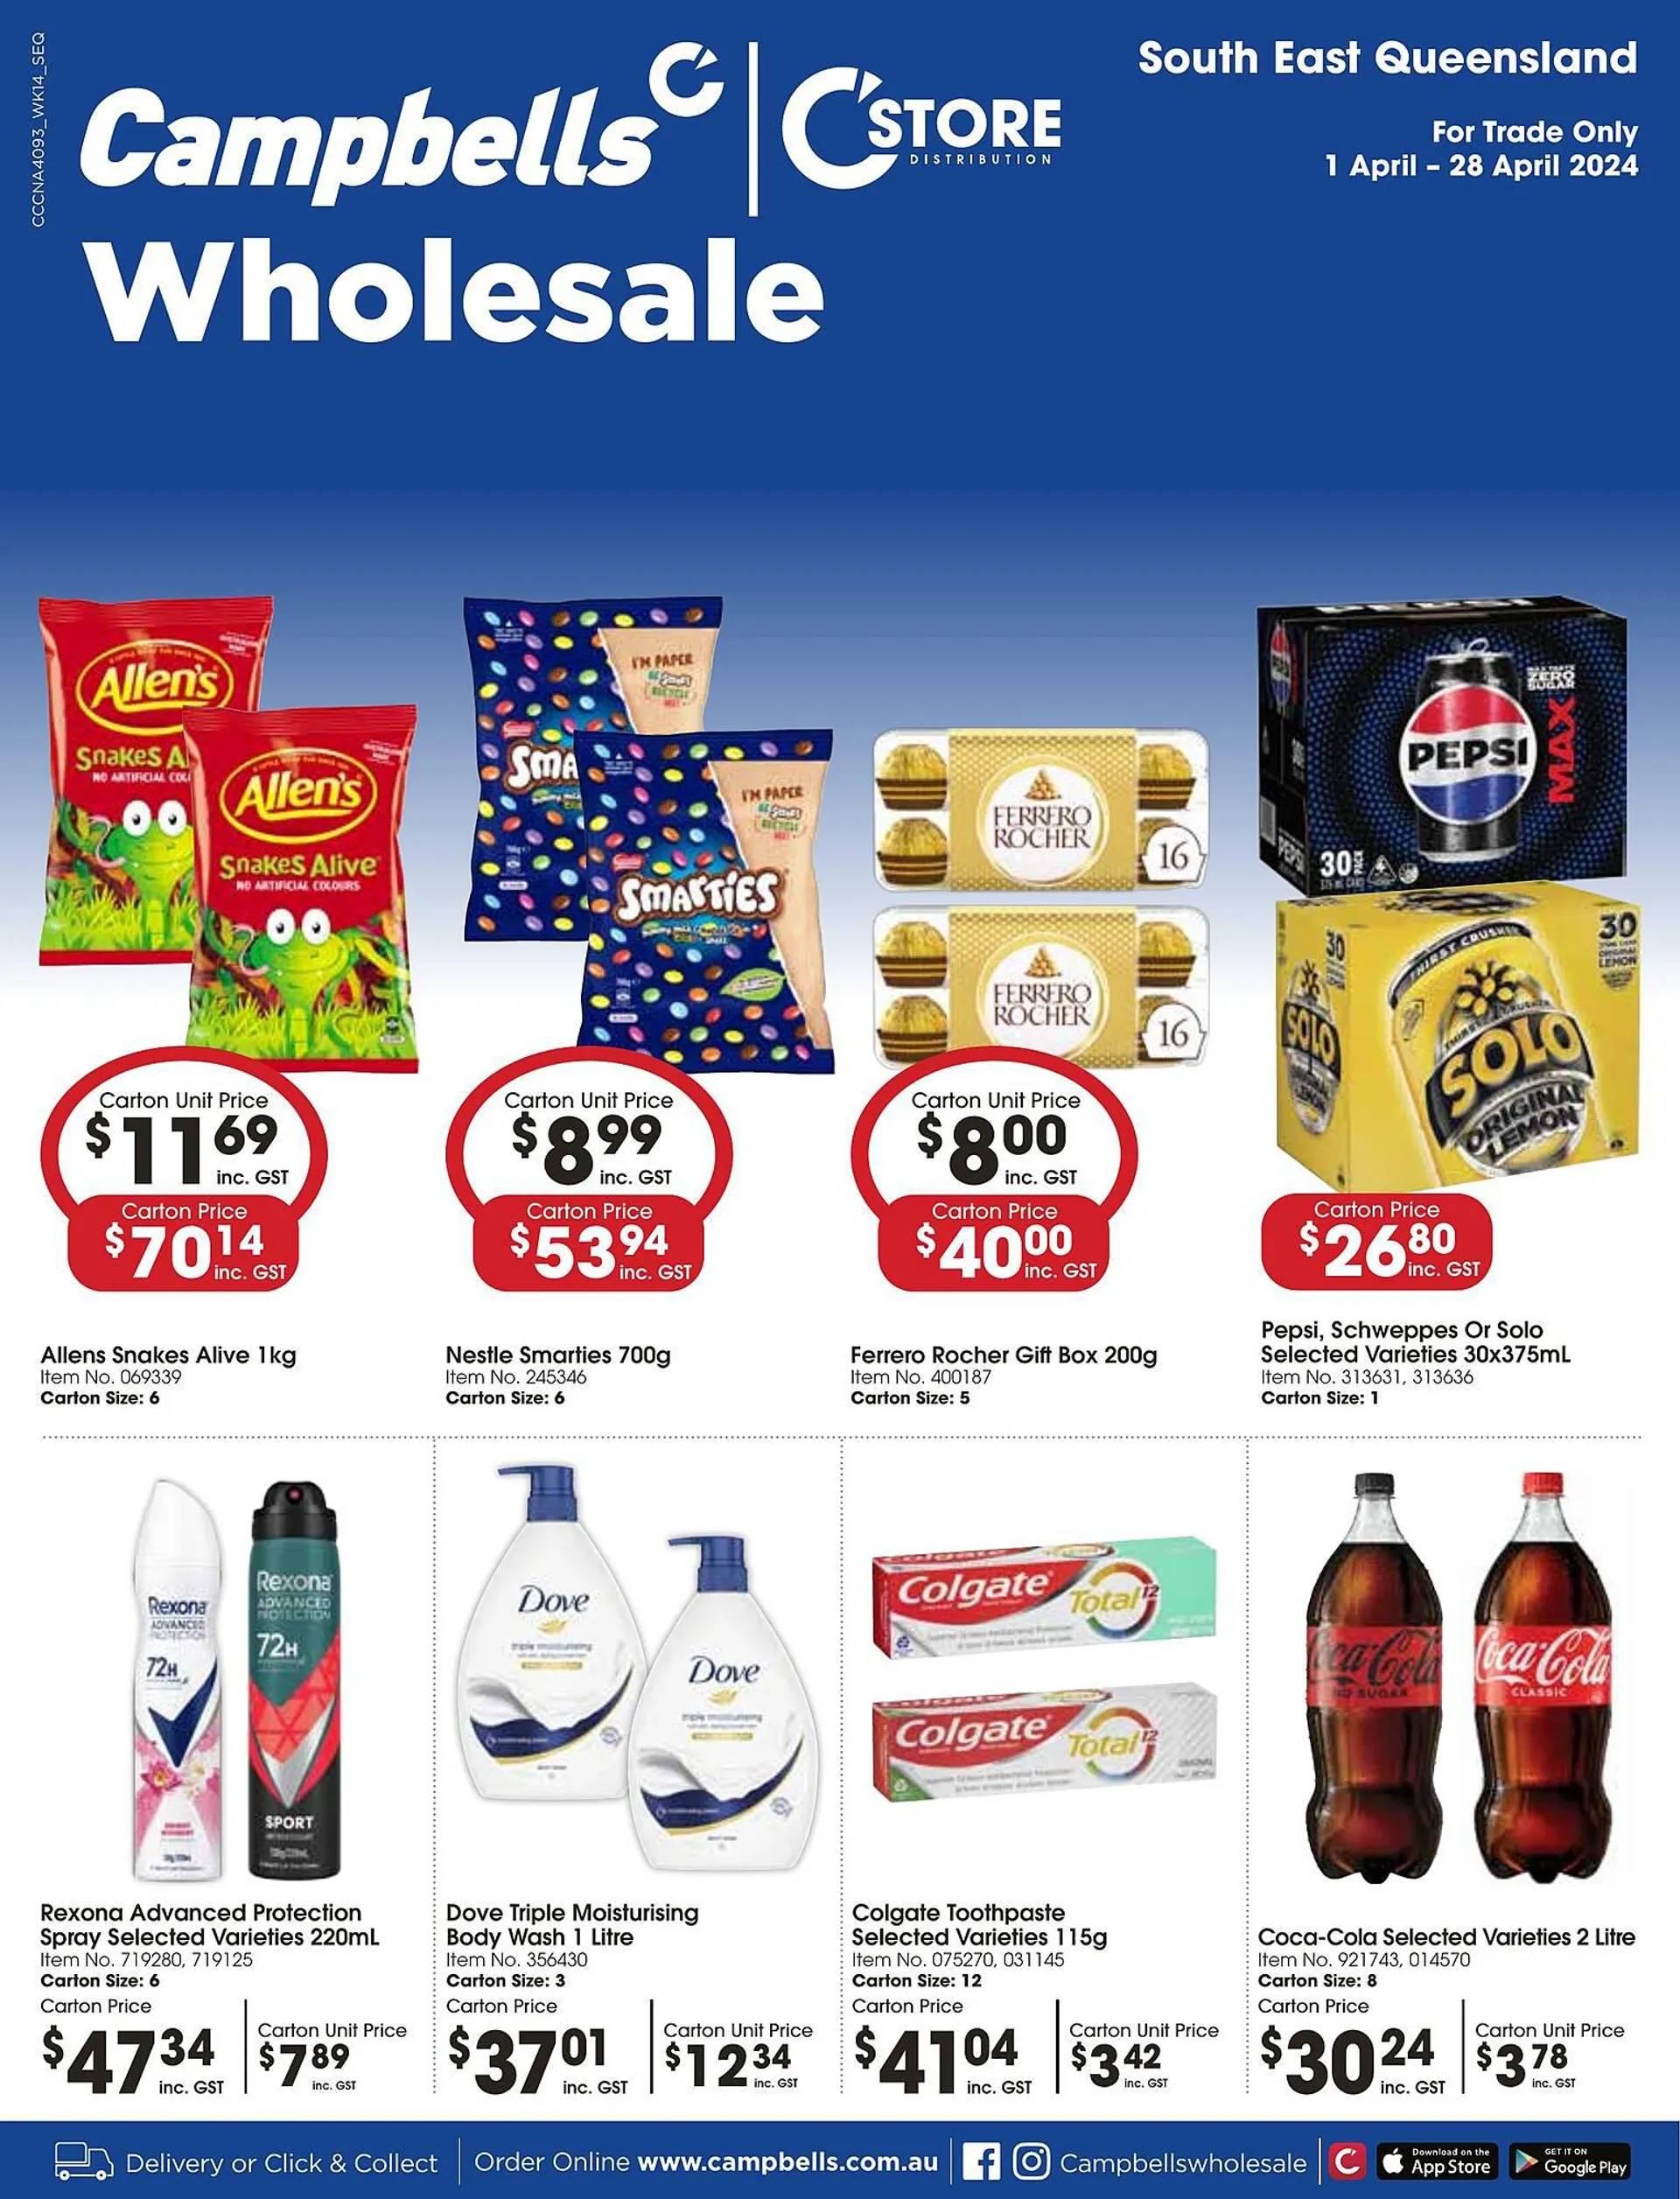 Campbells Wholesale catalogue - Catalogue valid from 1 April to 28 April 2024 - page 1